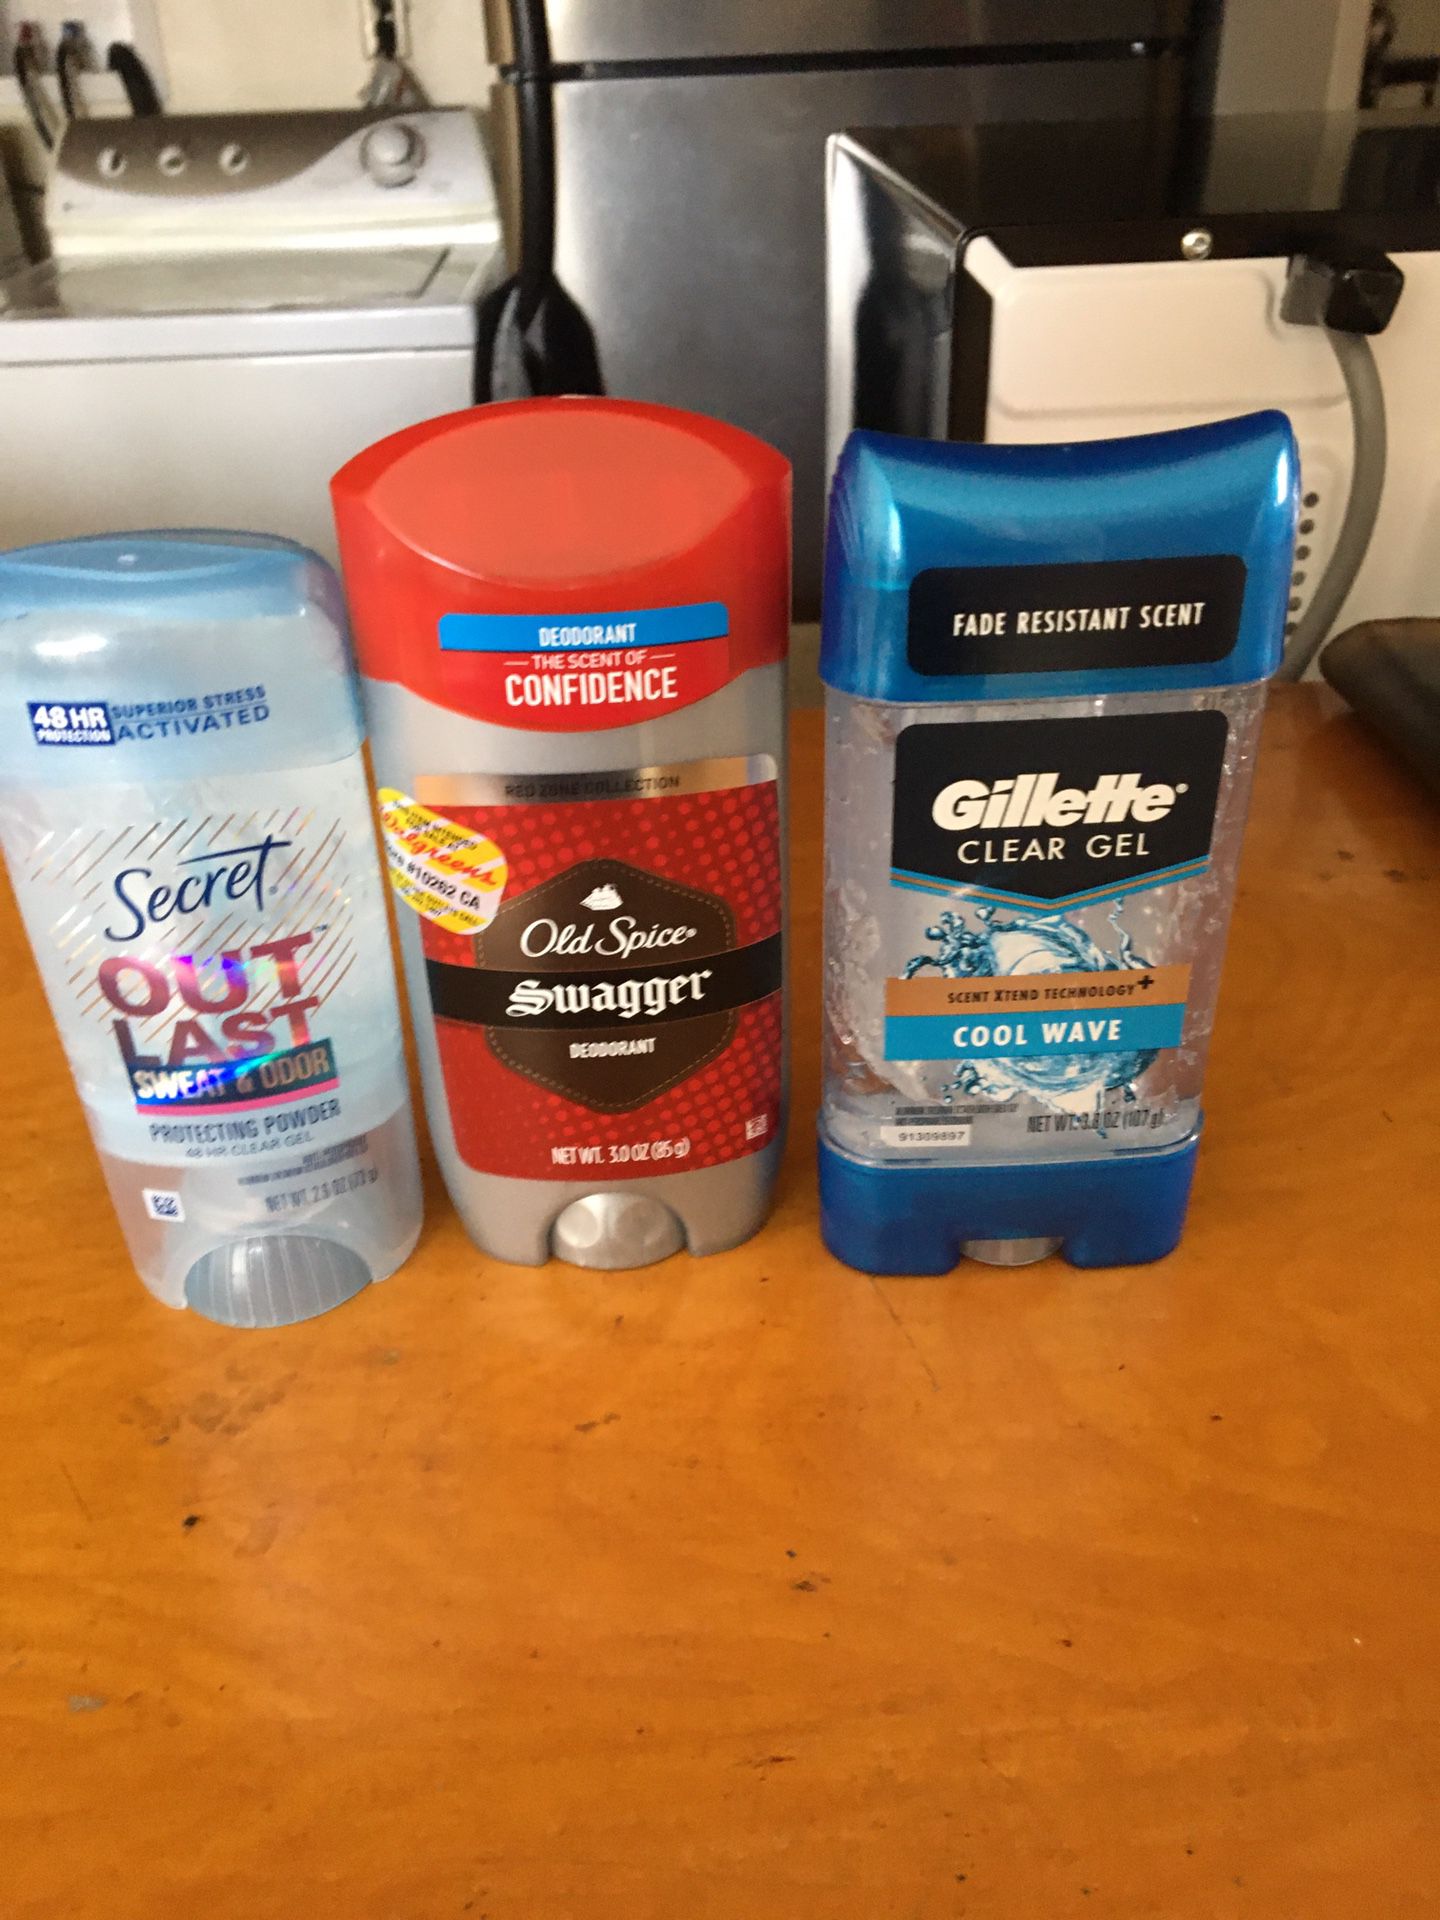 Gillette and old spice and secret